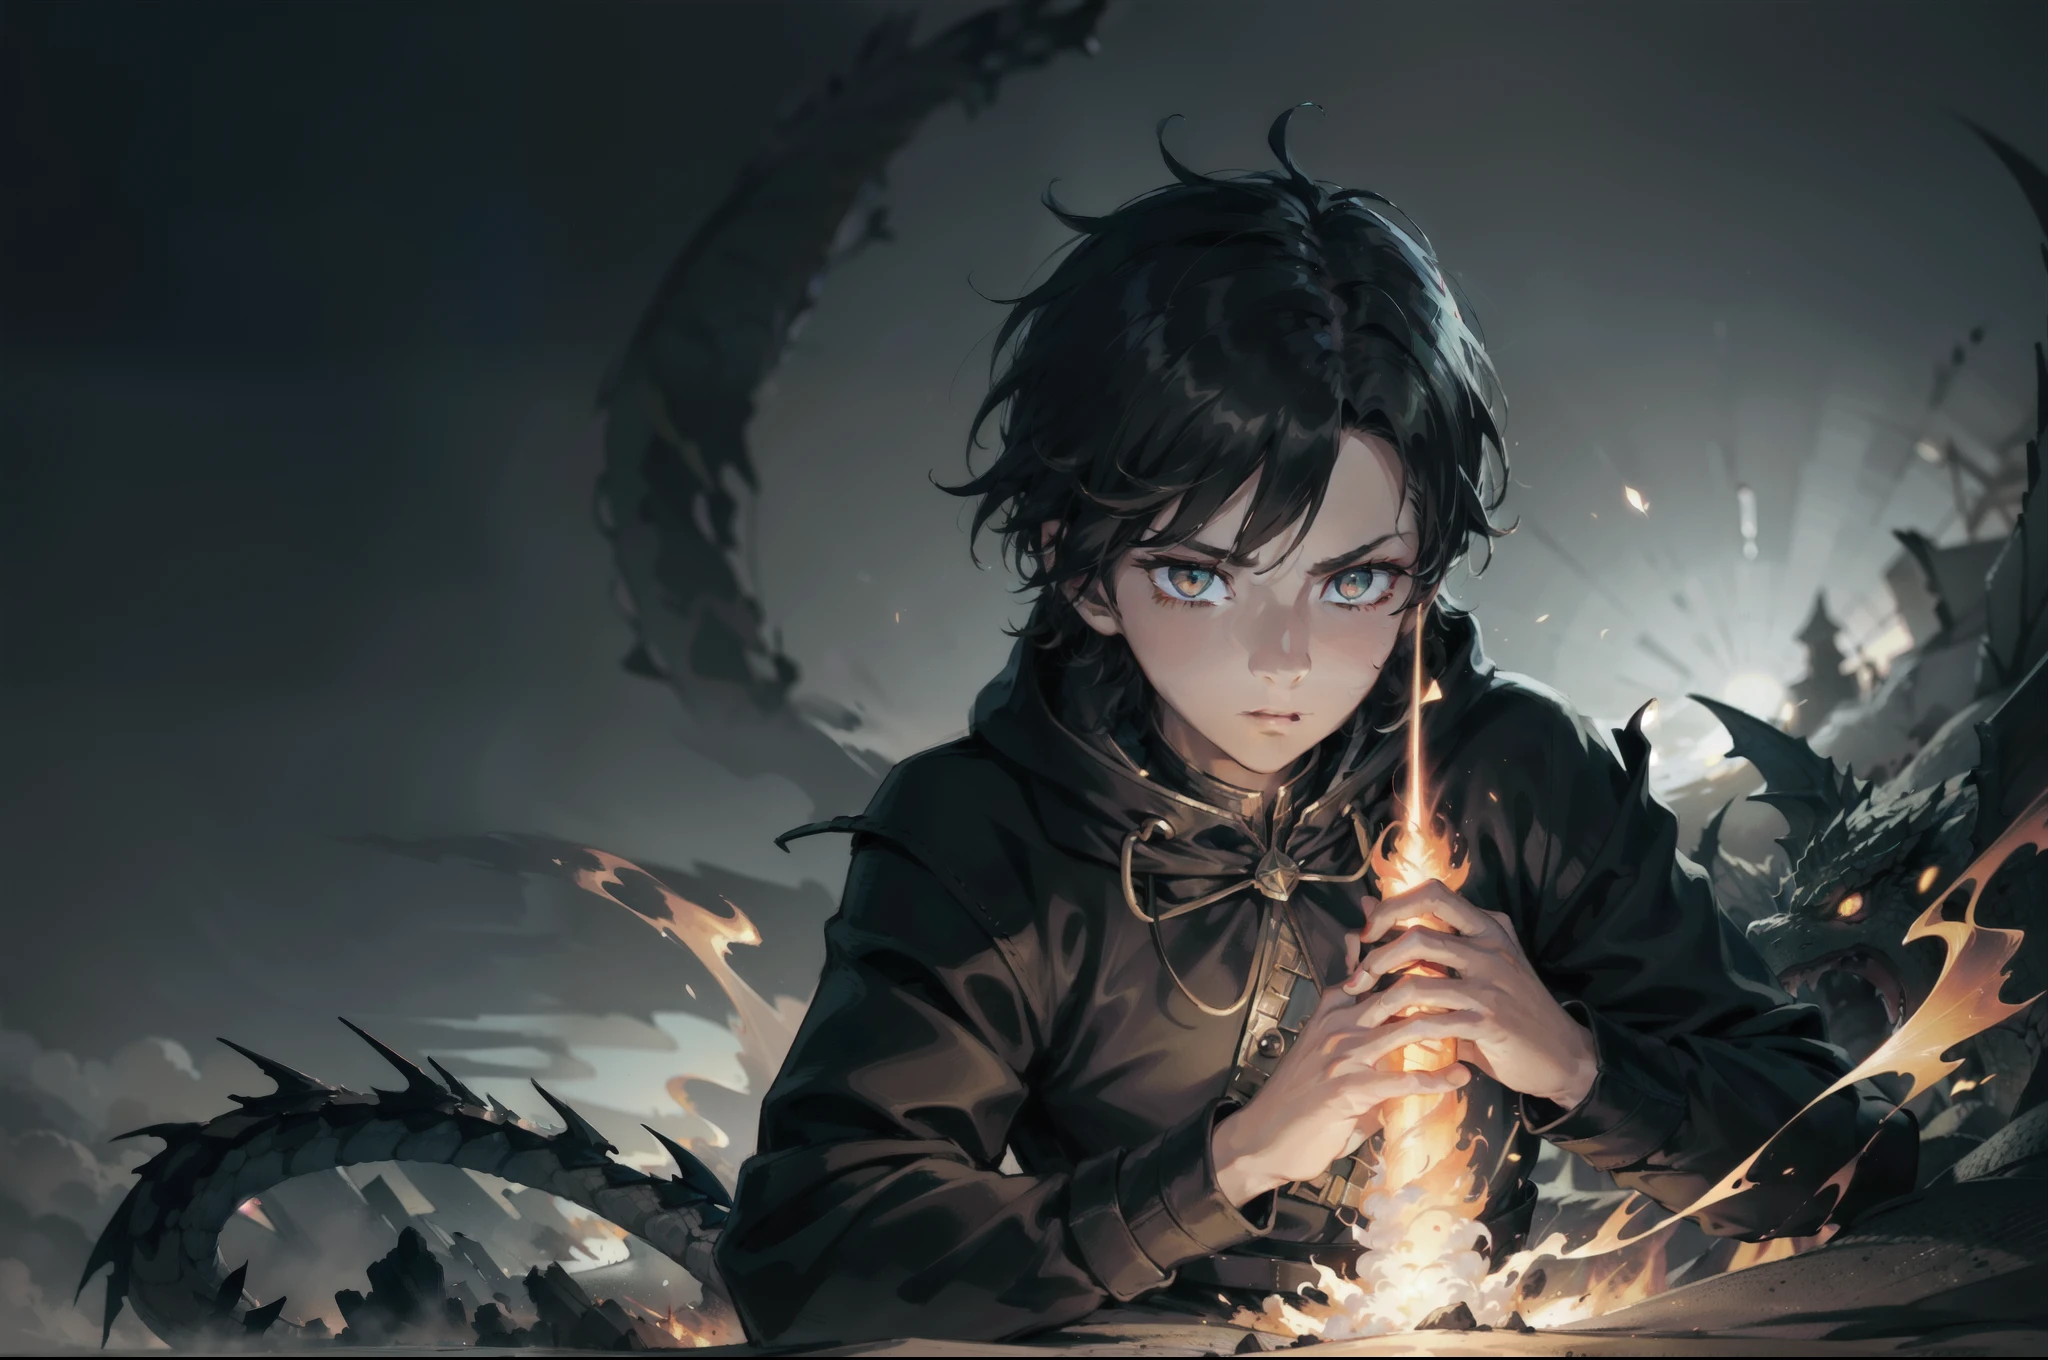 A boy with a dark and mysterious aura, clutching a luminescent flare stick amidst billowing smoke while venturing into the unknown. The glow of his dragon eyes pierces through the darkness, revealing a hidden abyss.